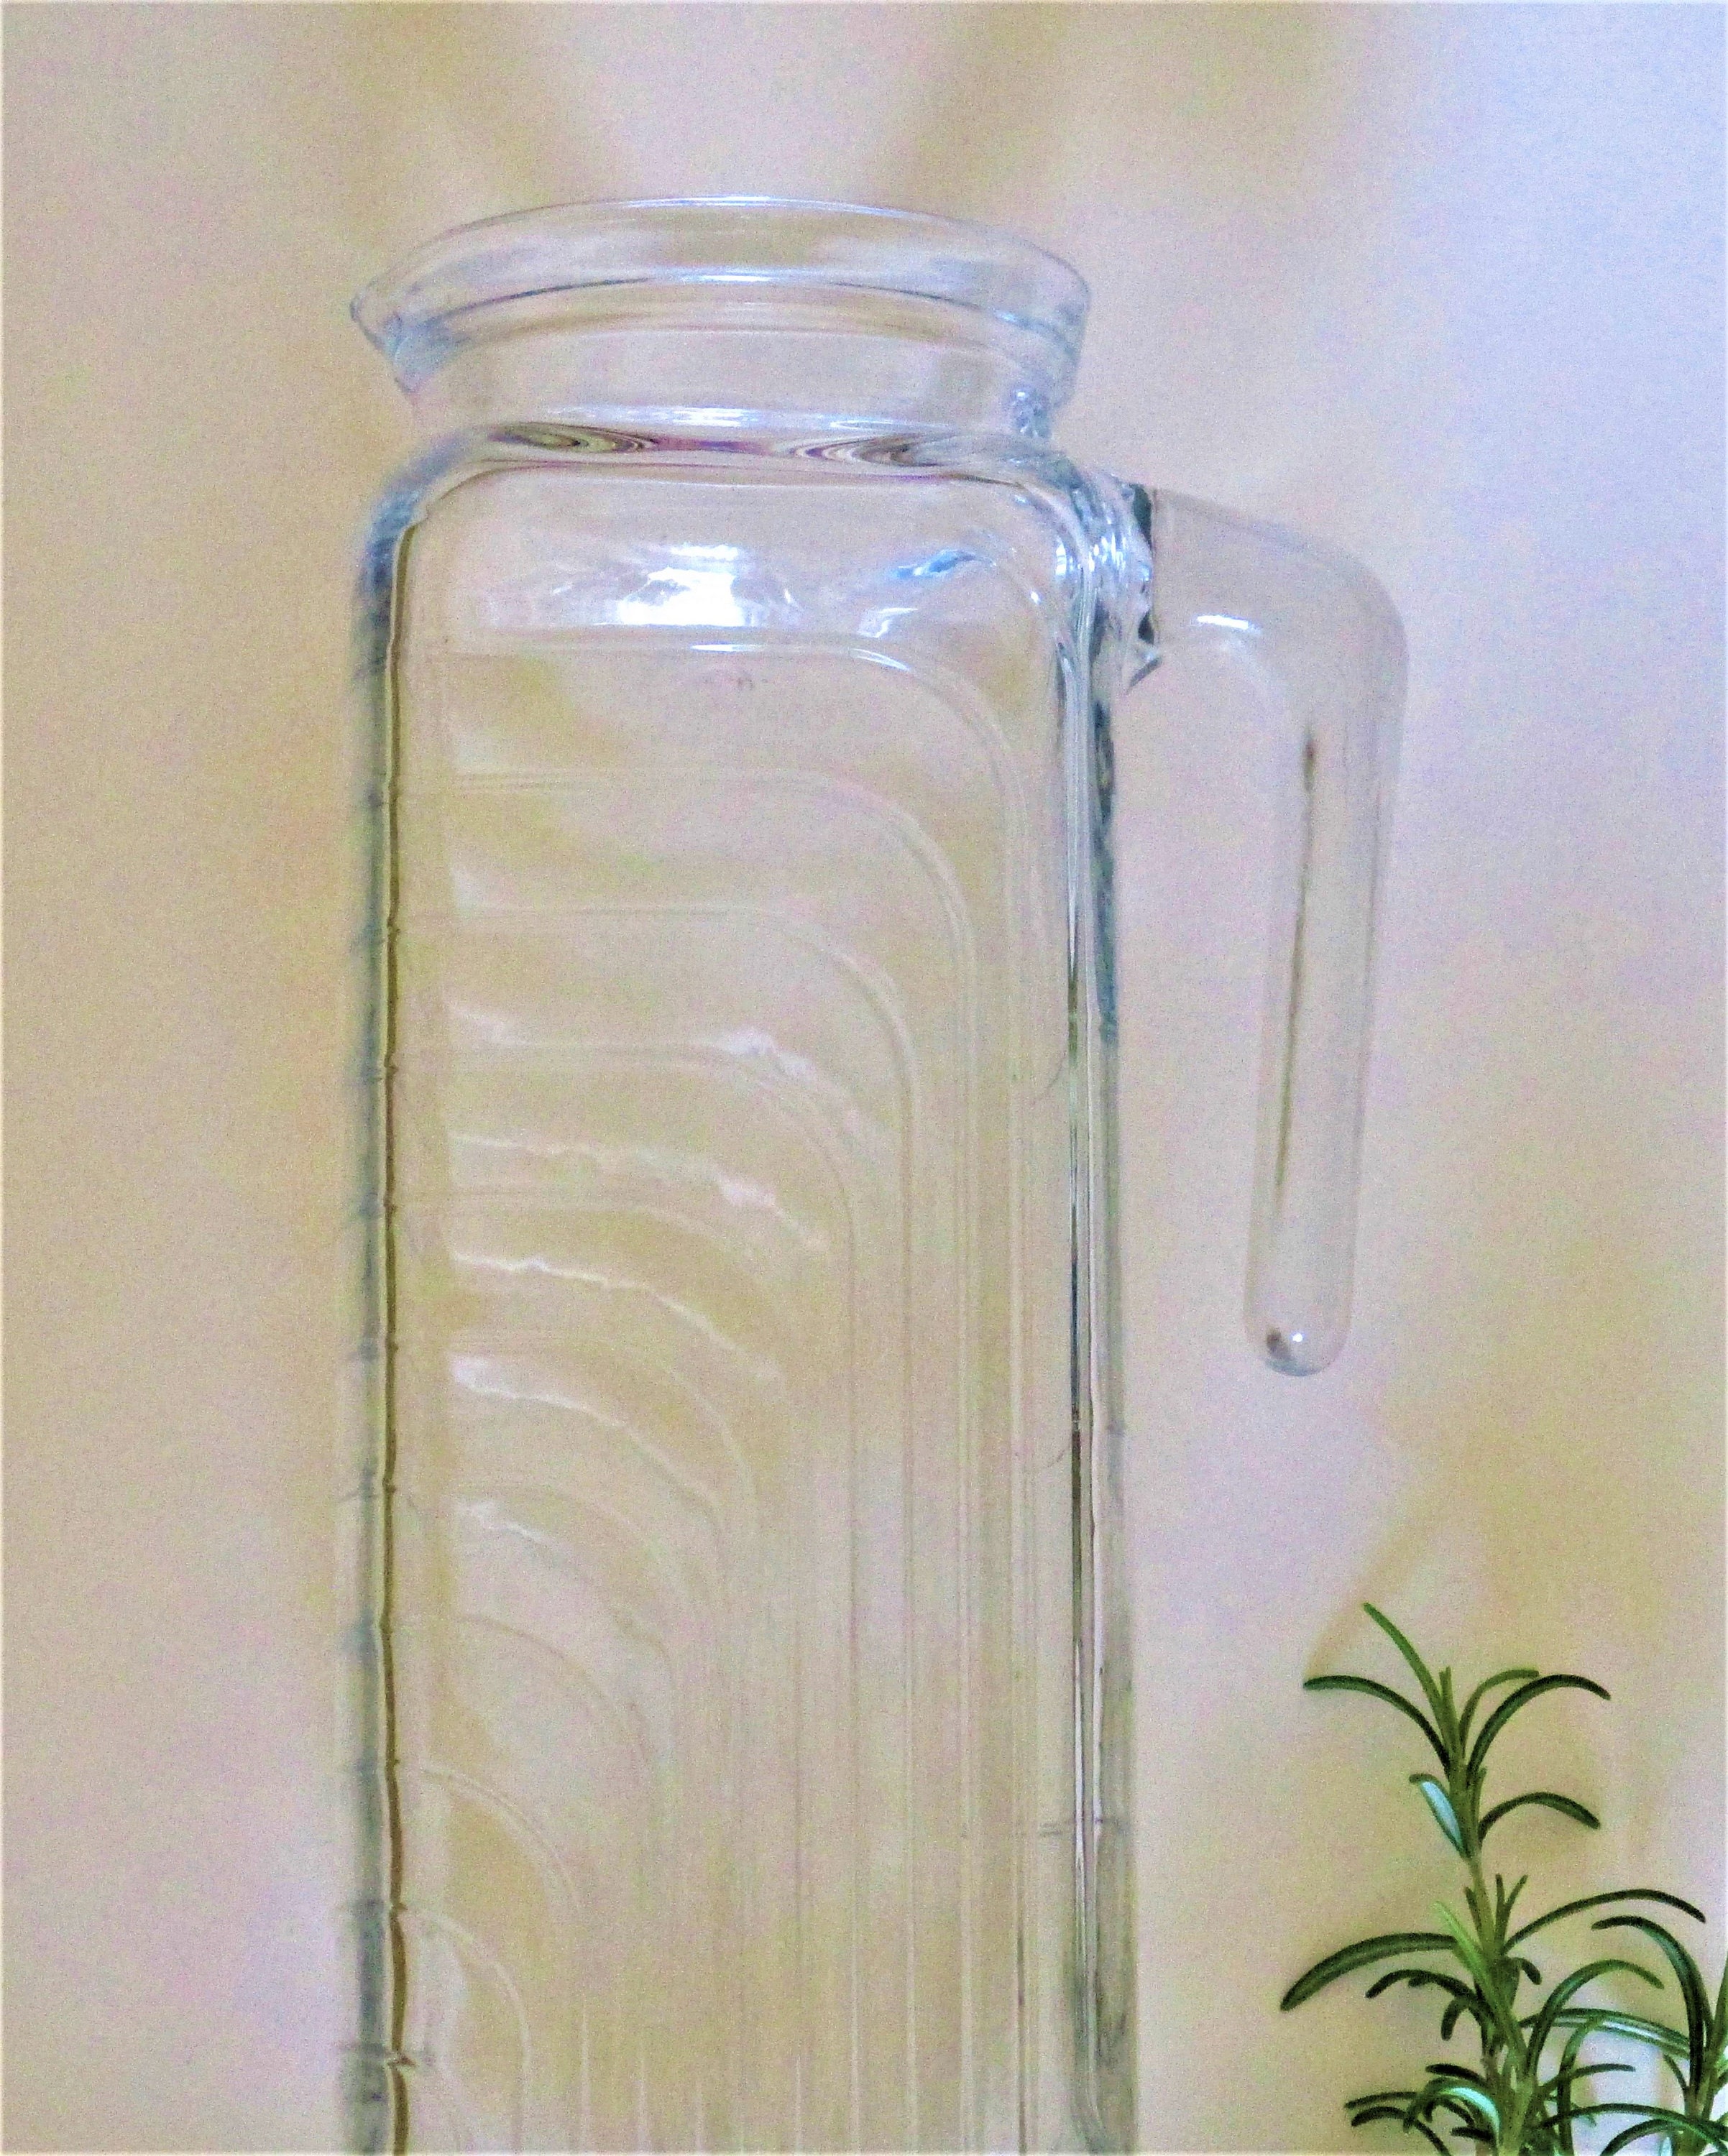 Glass Pitcher, 60oz CLear Glass Pitcher with Bamboo Lid and Spout, 1.8L  Glass Water Pitcher, Iced Tea Pitcher for Fridge, Pitchers Beverage Pitchers,  Juice Lemonade Carafe 